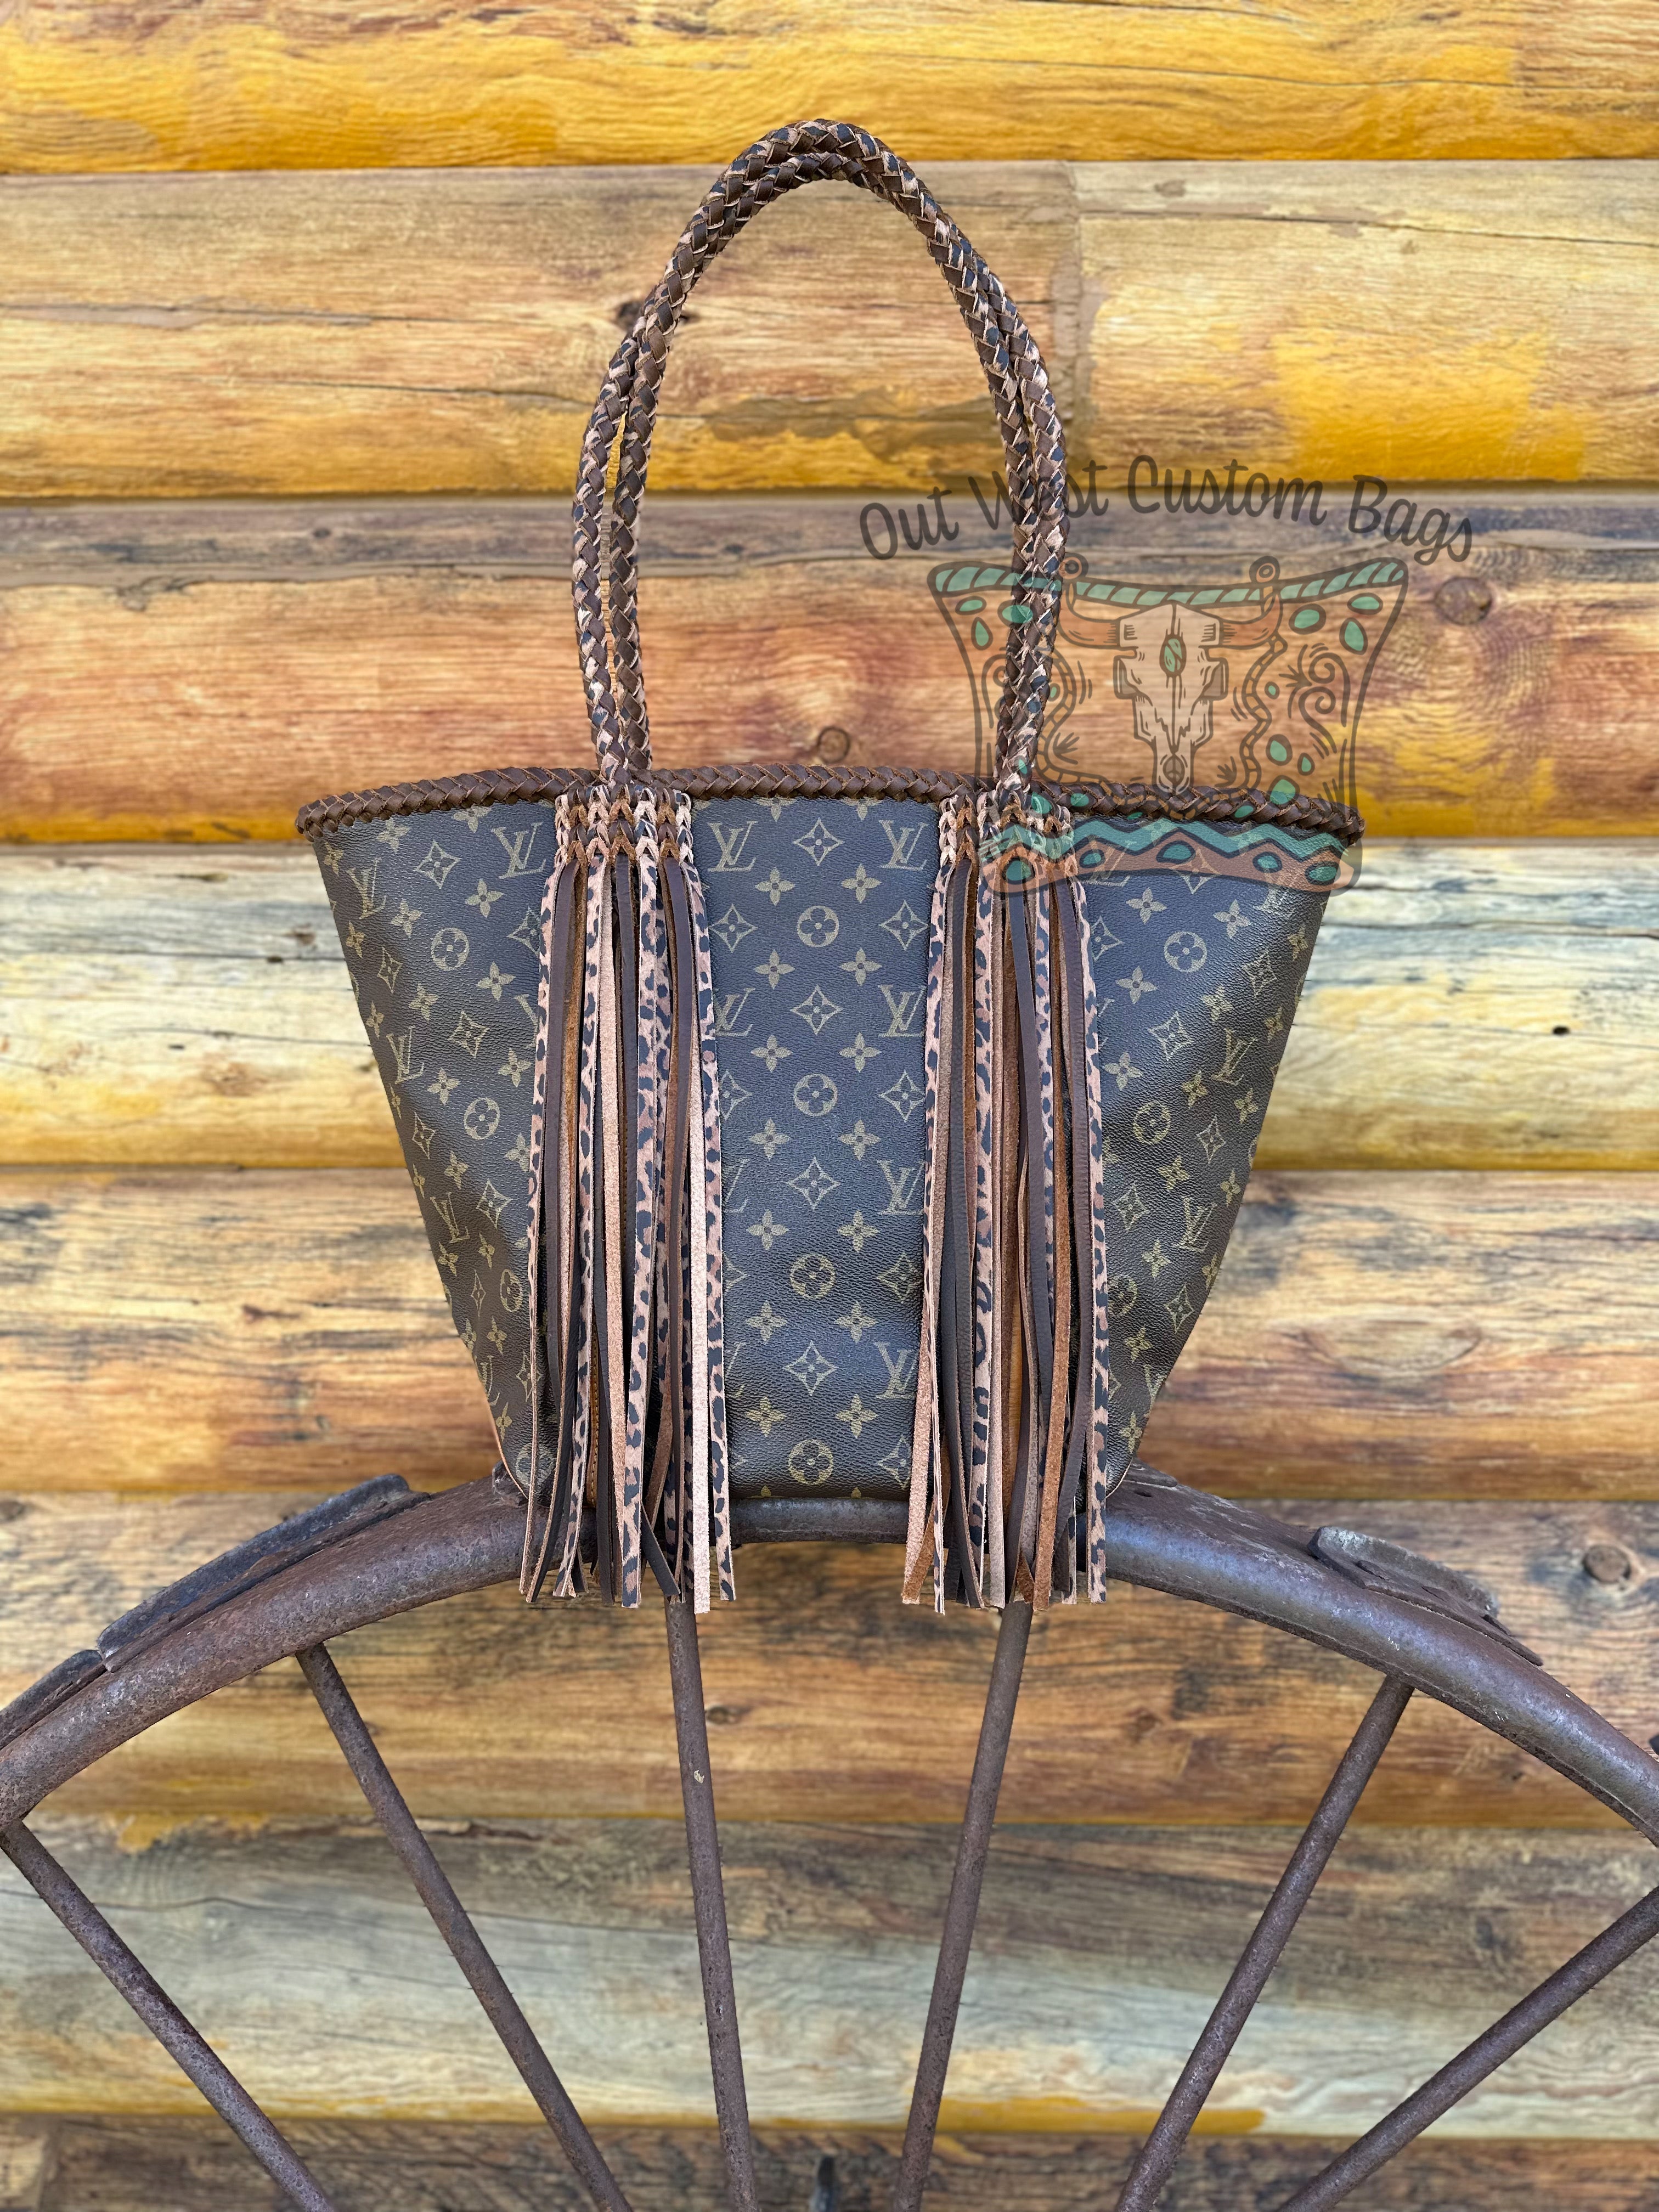 Out West Speedy 30 or 35 Revamped with Leather Braiding and Fringe – Out  West Custom Bags